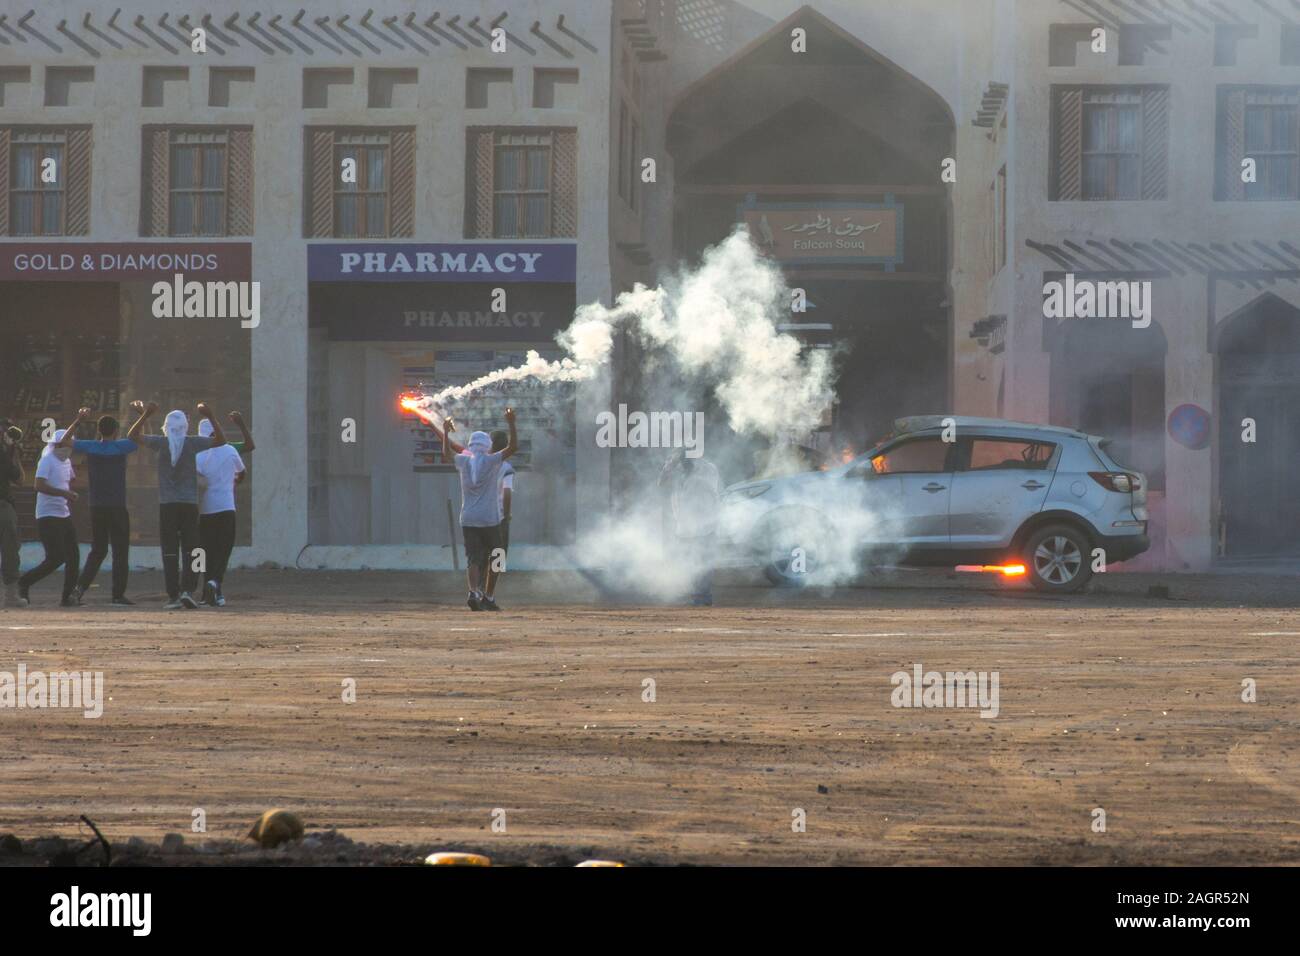 Military police riot response to a protest with tear gas, smoke, fire, explosions. Political expression, riot, protest, demostration and military conc Stock Photo